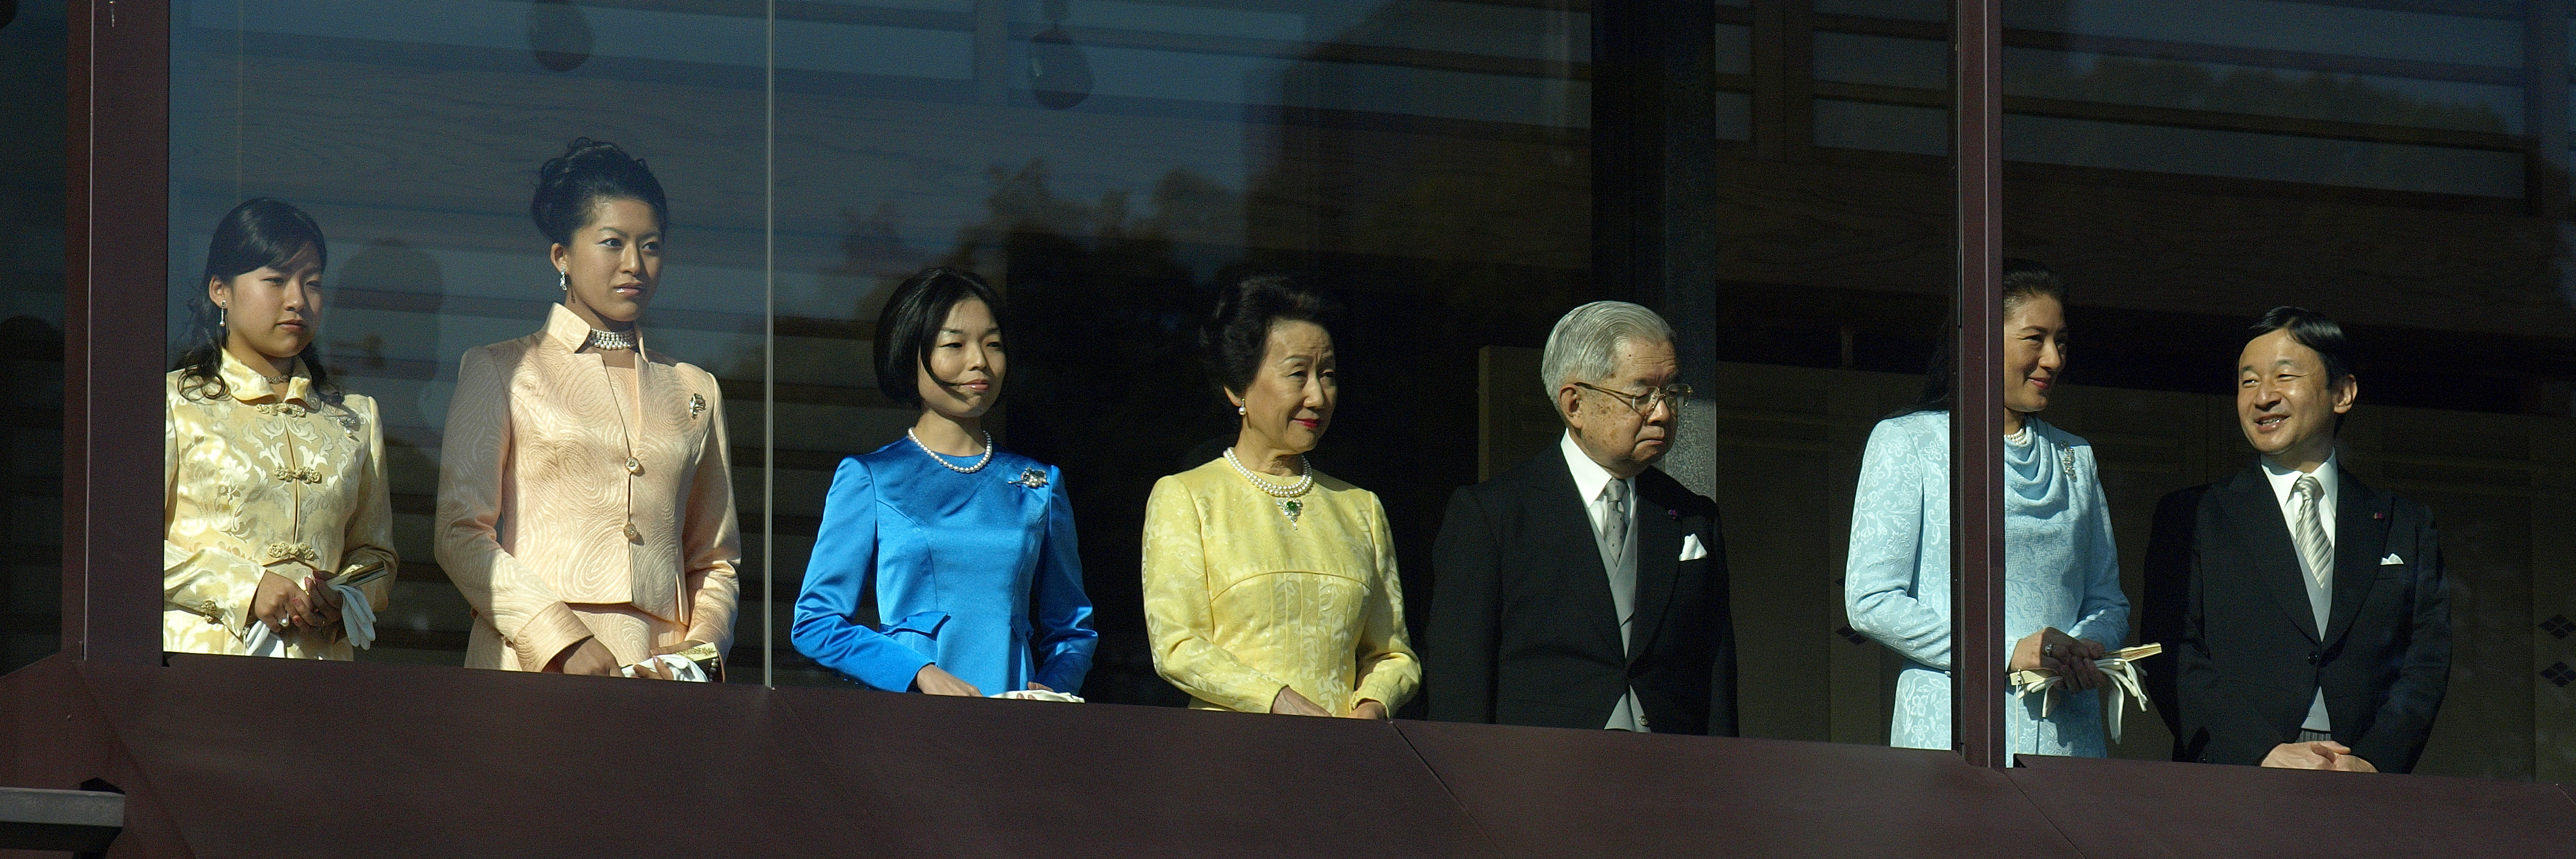 The_New_Year_Greeting_2011_at_the_Tokyo_Imperial_Palace.jpg